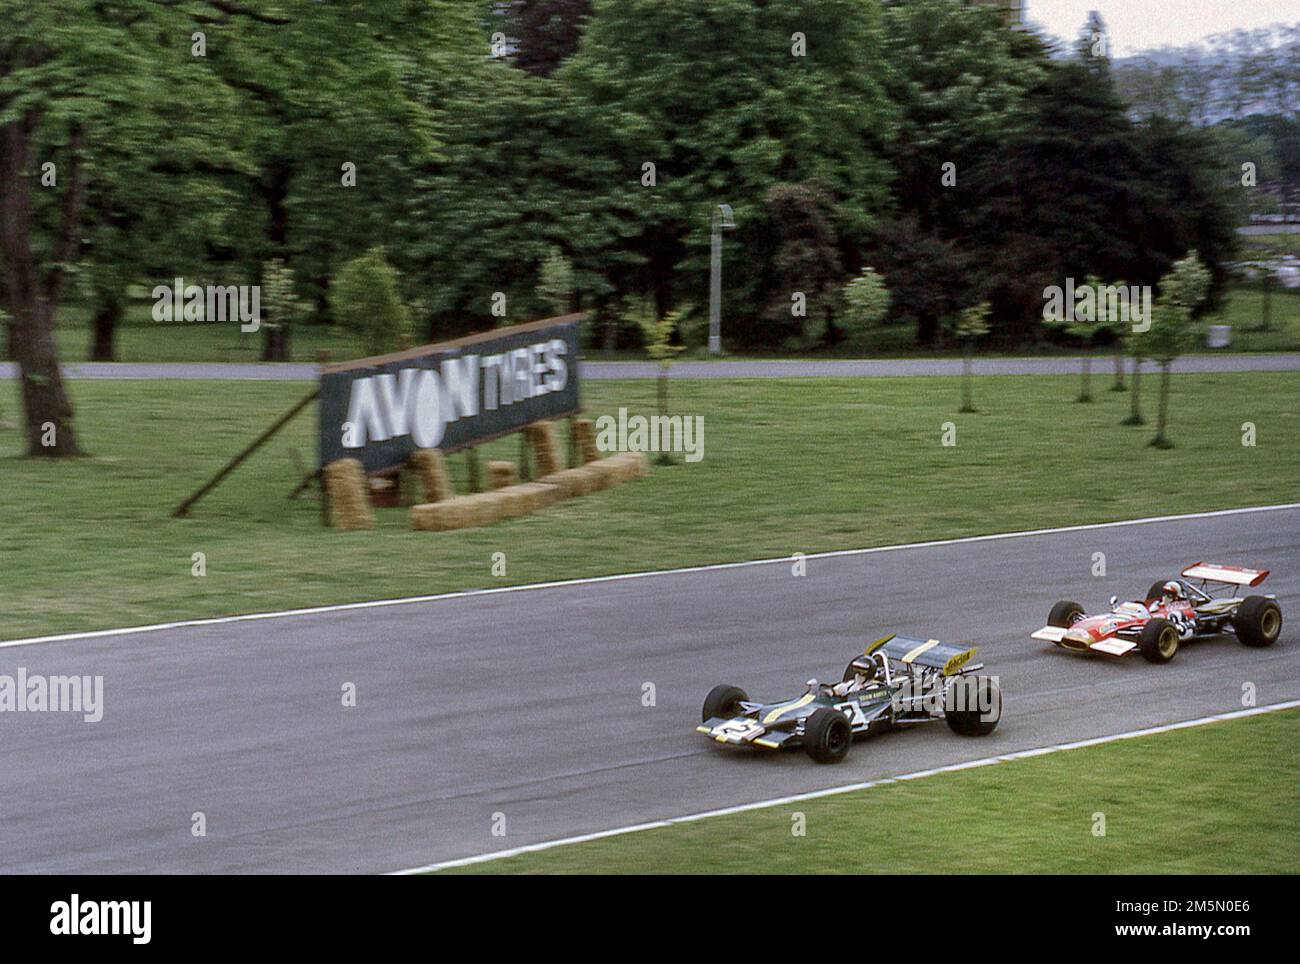 Jochen Rindt in a Lotus 69  leading Francois Cevert in a Tecno 69 in the 1970 European Formula 2 race at Crystal Palace race track 25/5/1970 Stock Photo